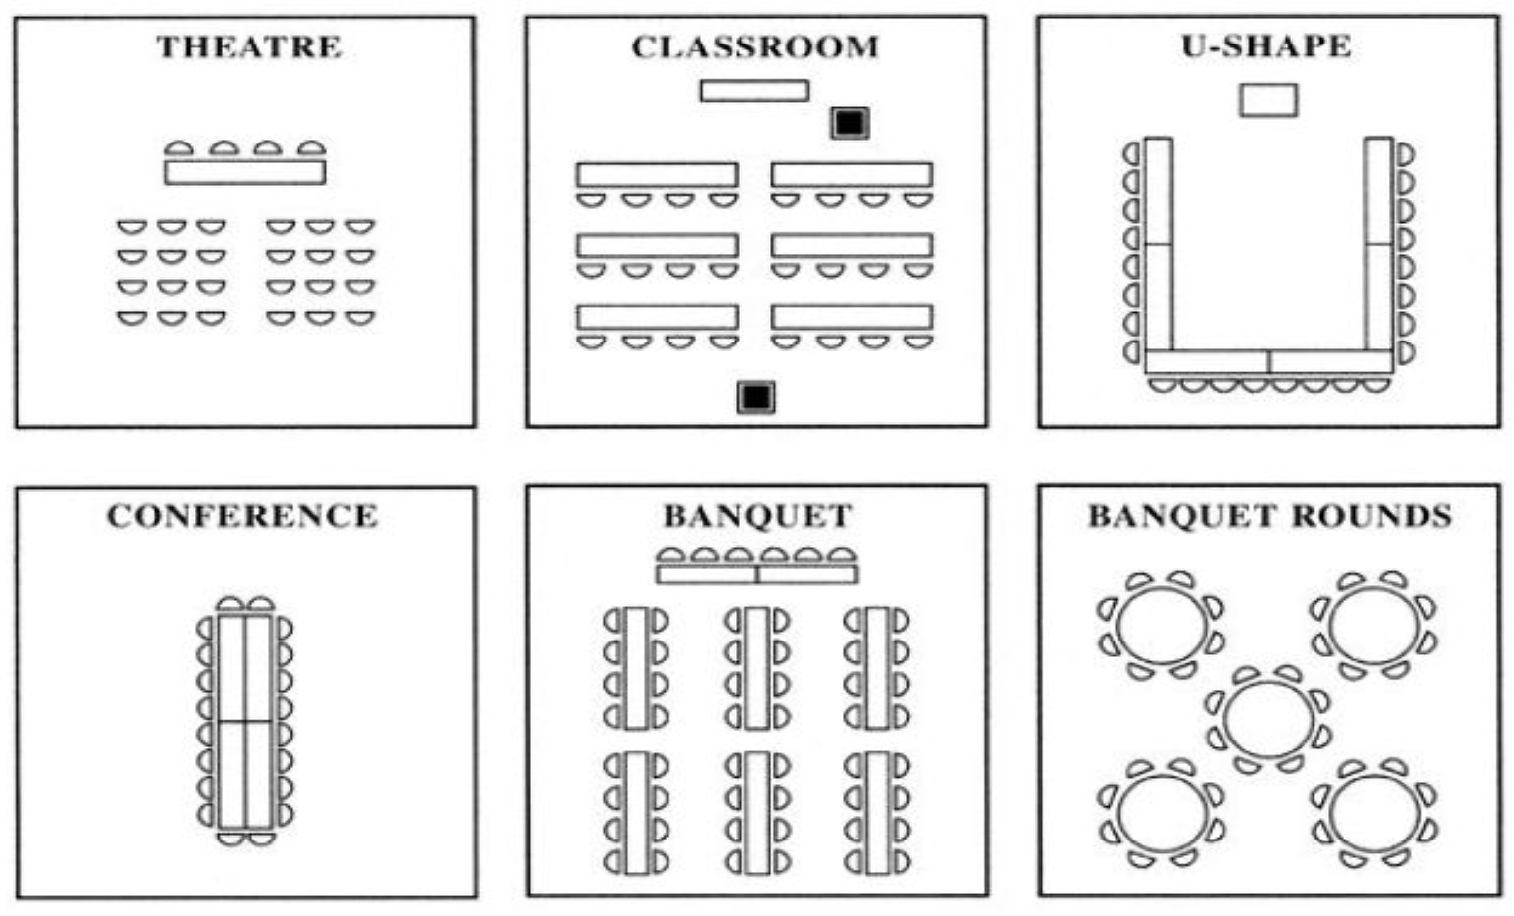 6 different types of room layouts: Theater, classroom, U-shape, Conference, Banquet, and Banquet Rounds